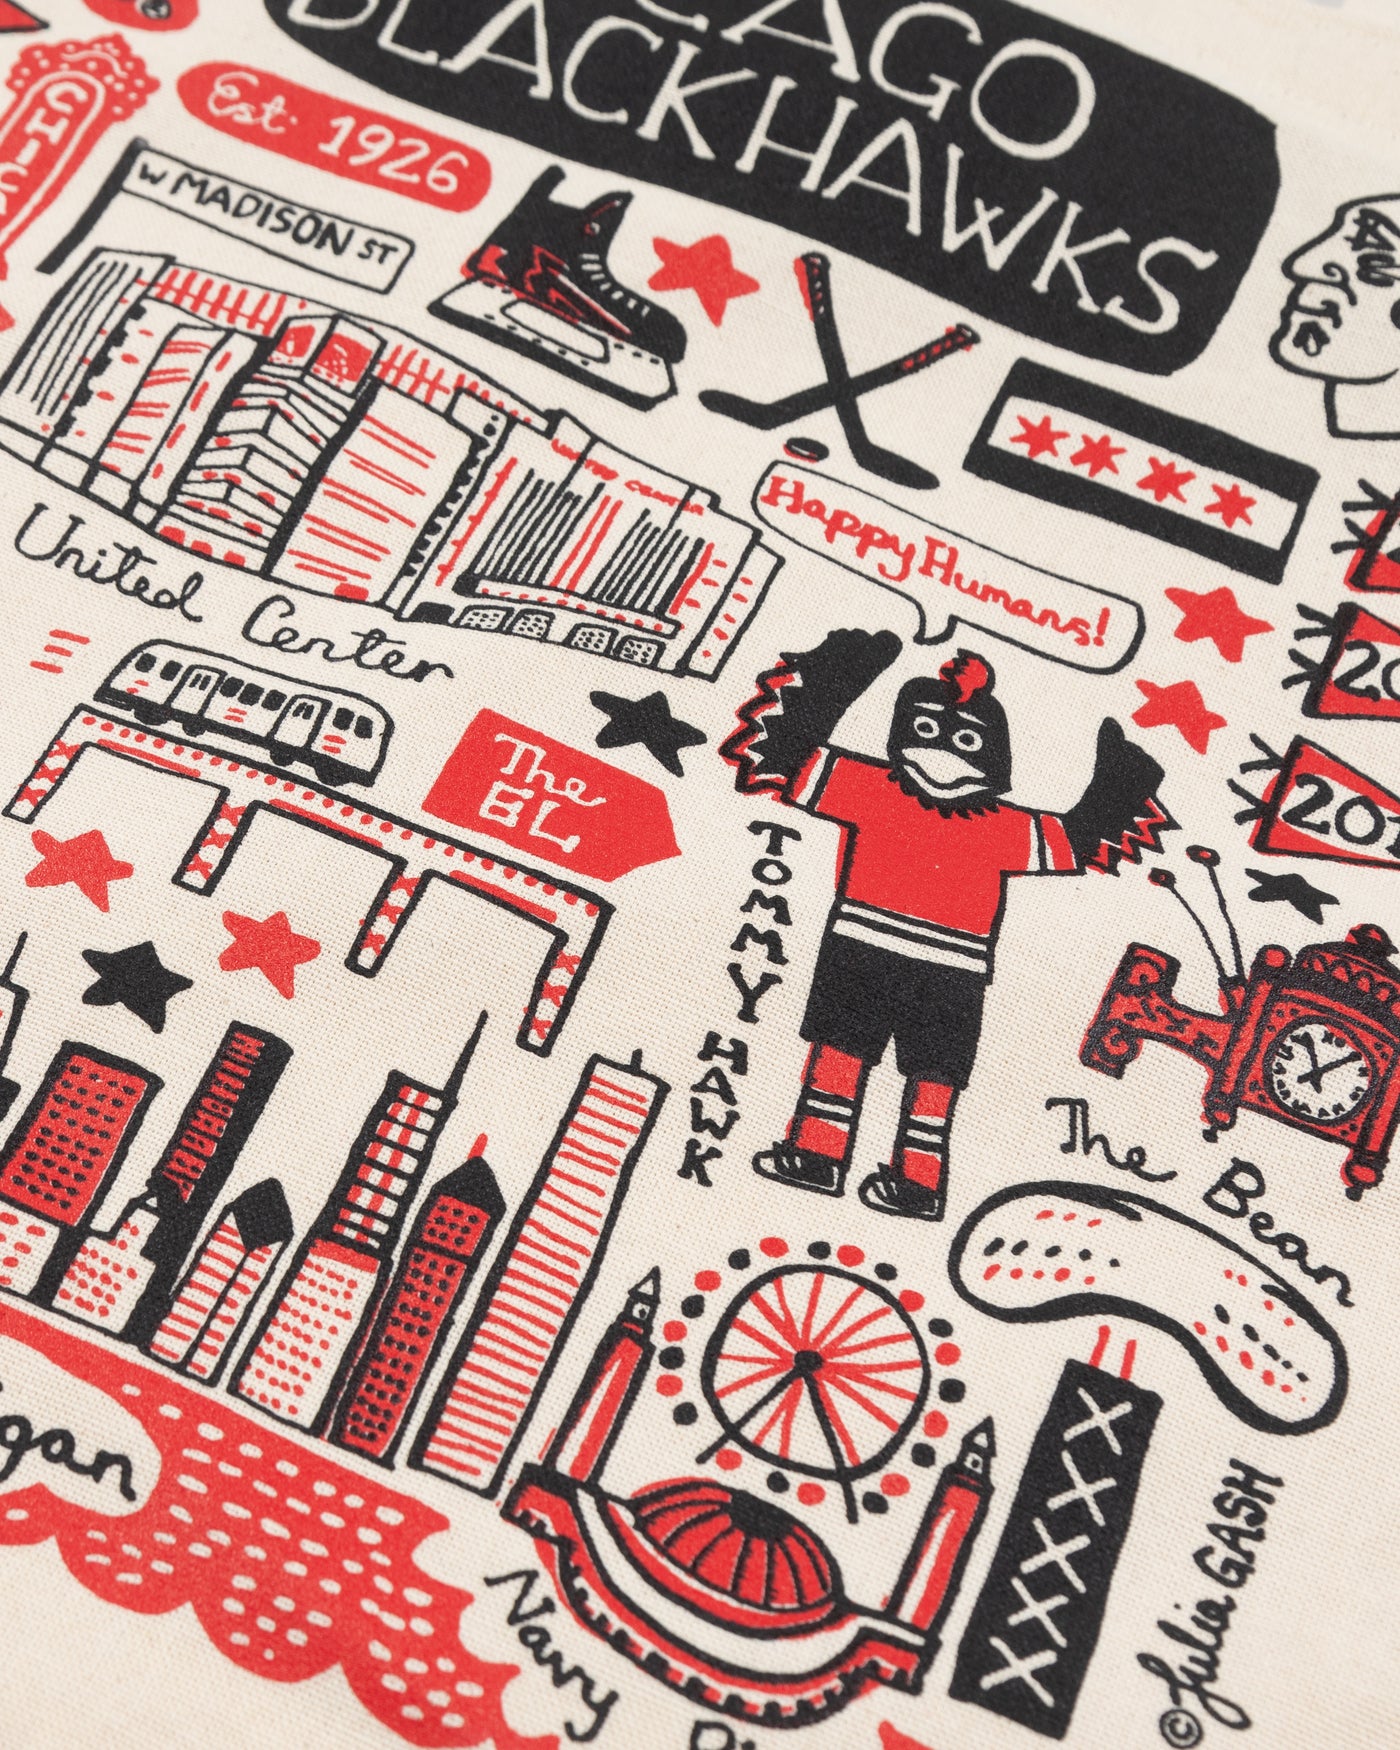 canvas tote bag with Julia Gash art work inspired by Chicago and the Chicago Blackhawks - detail lay flat